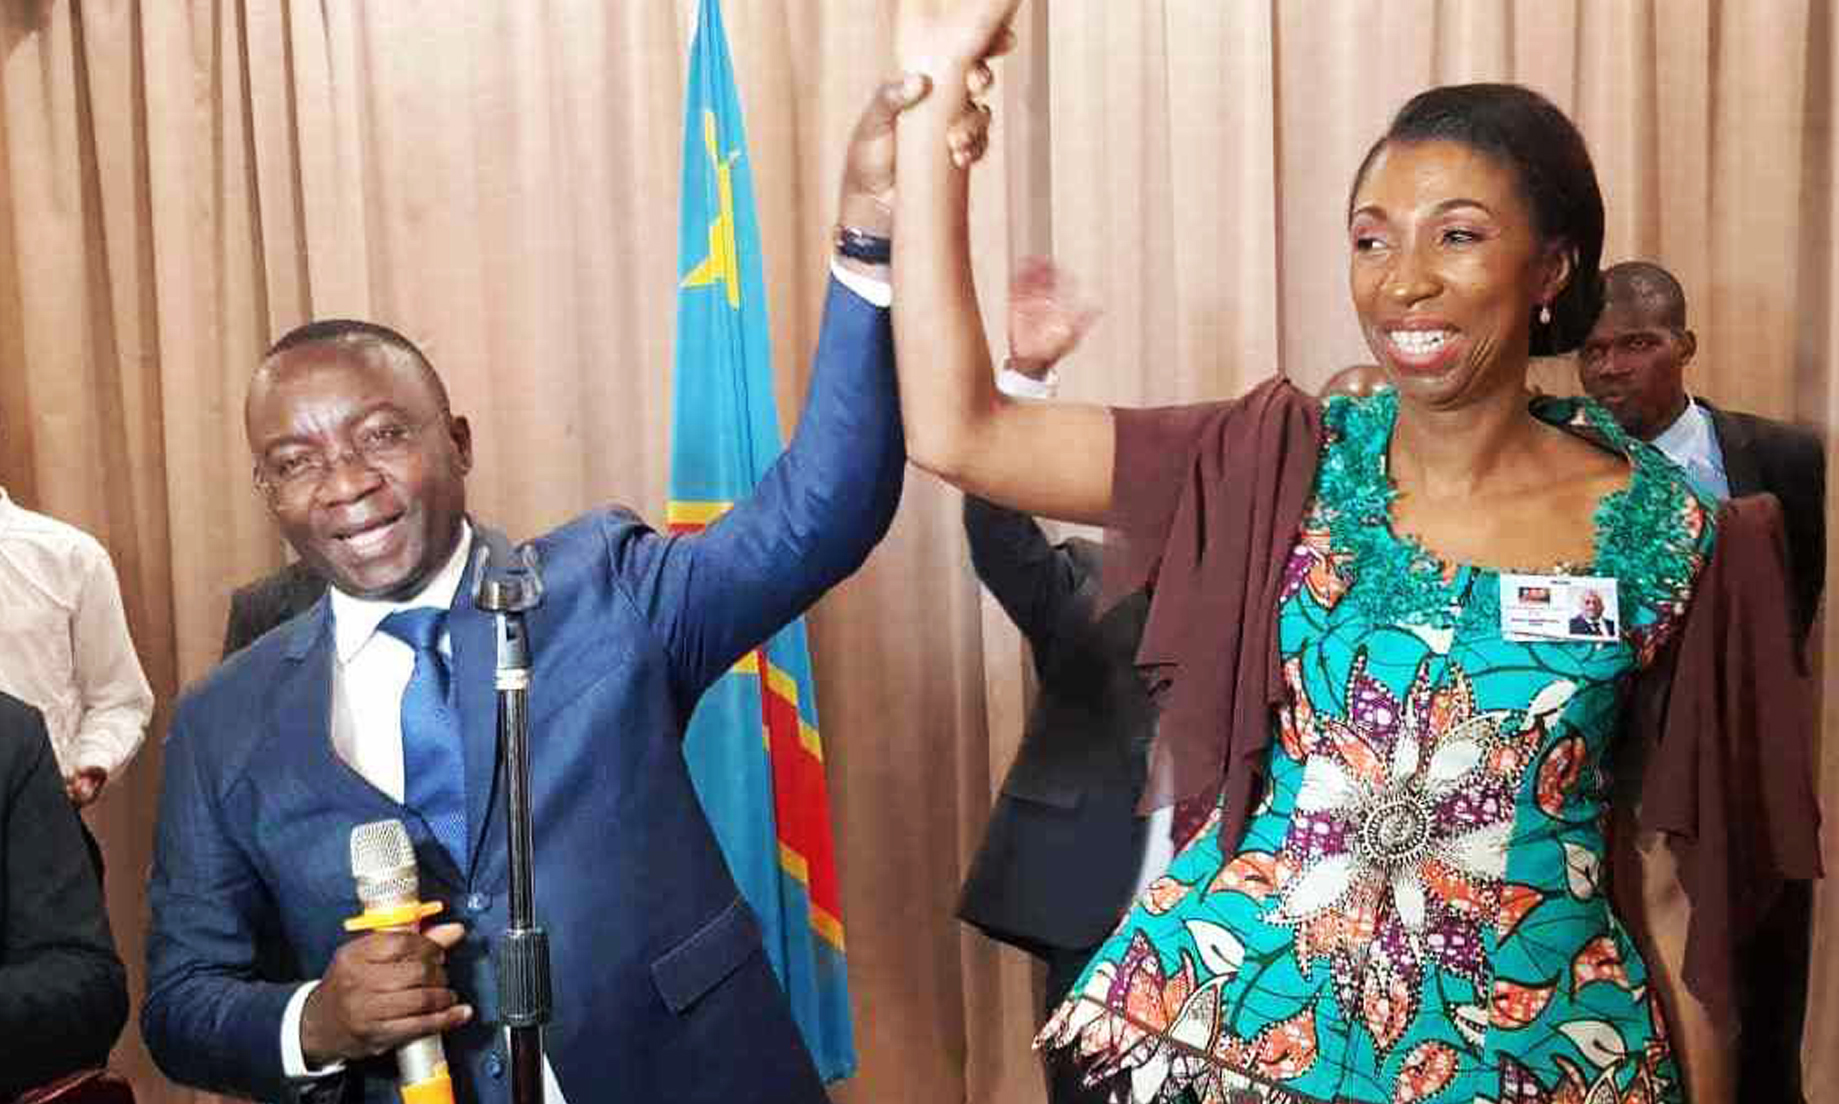 Jeanine Mabunda, first woman elected to lead DRC’s National Assembly